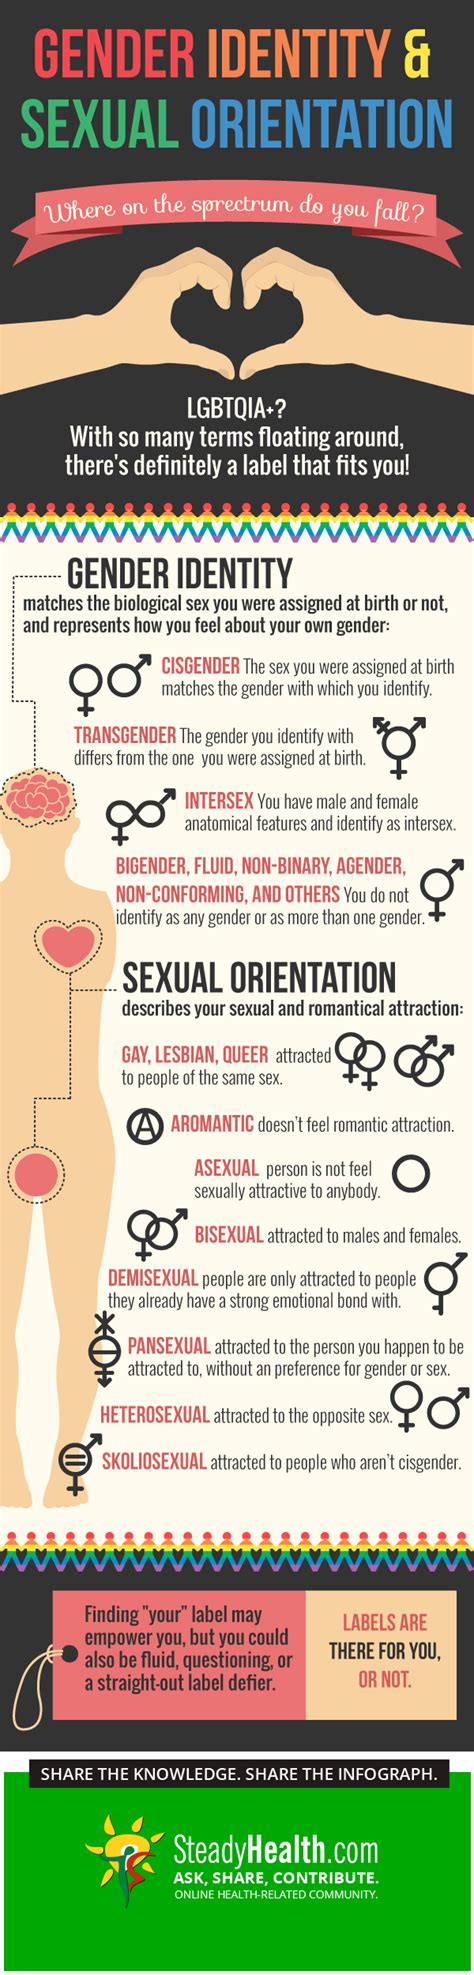 Gender Identity And Sexual Orientation Where On The